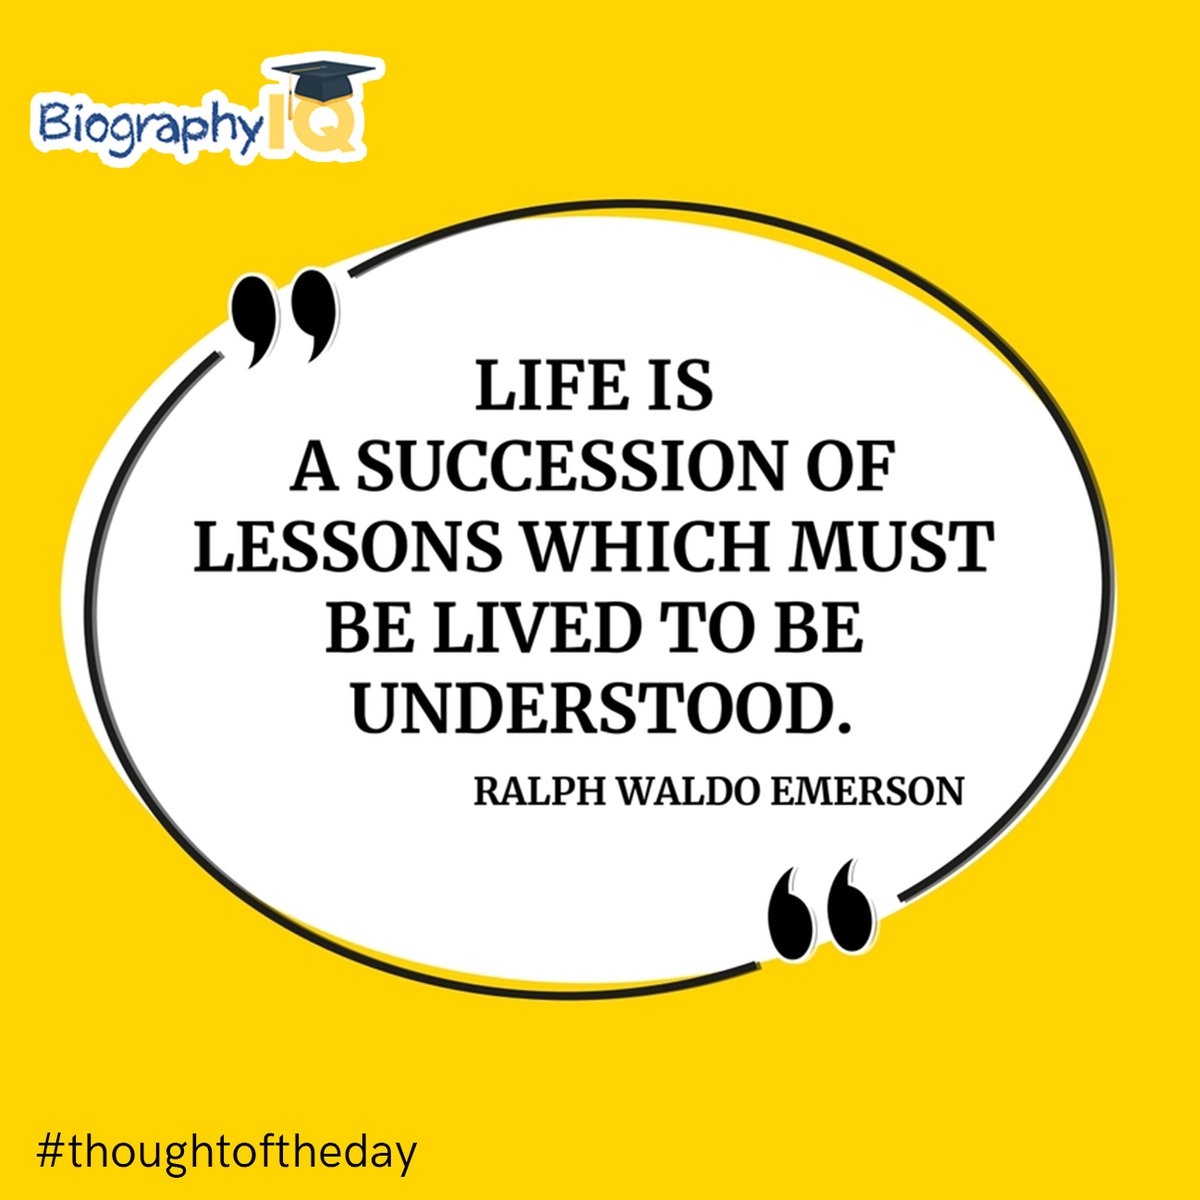 #life #successionoflessons #lived #understood #ralphwaldoemerson #thoughtoftheday #Motivationalquote #dailymotivation #quotes #quoteoftheday #todaythought #quotesaboutlife #quoteofthelife #dailyquotes #dailythoughts #motivationquotes